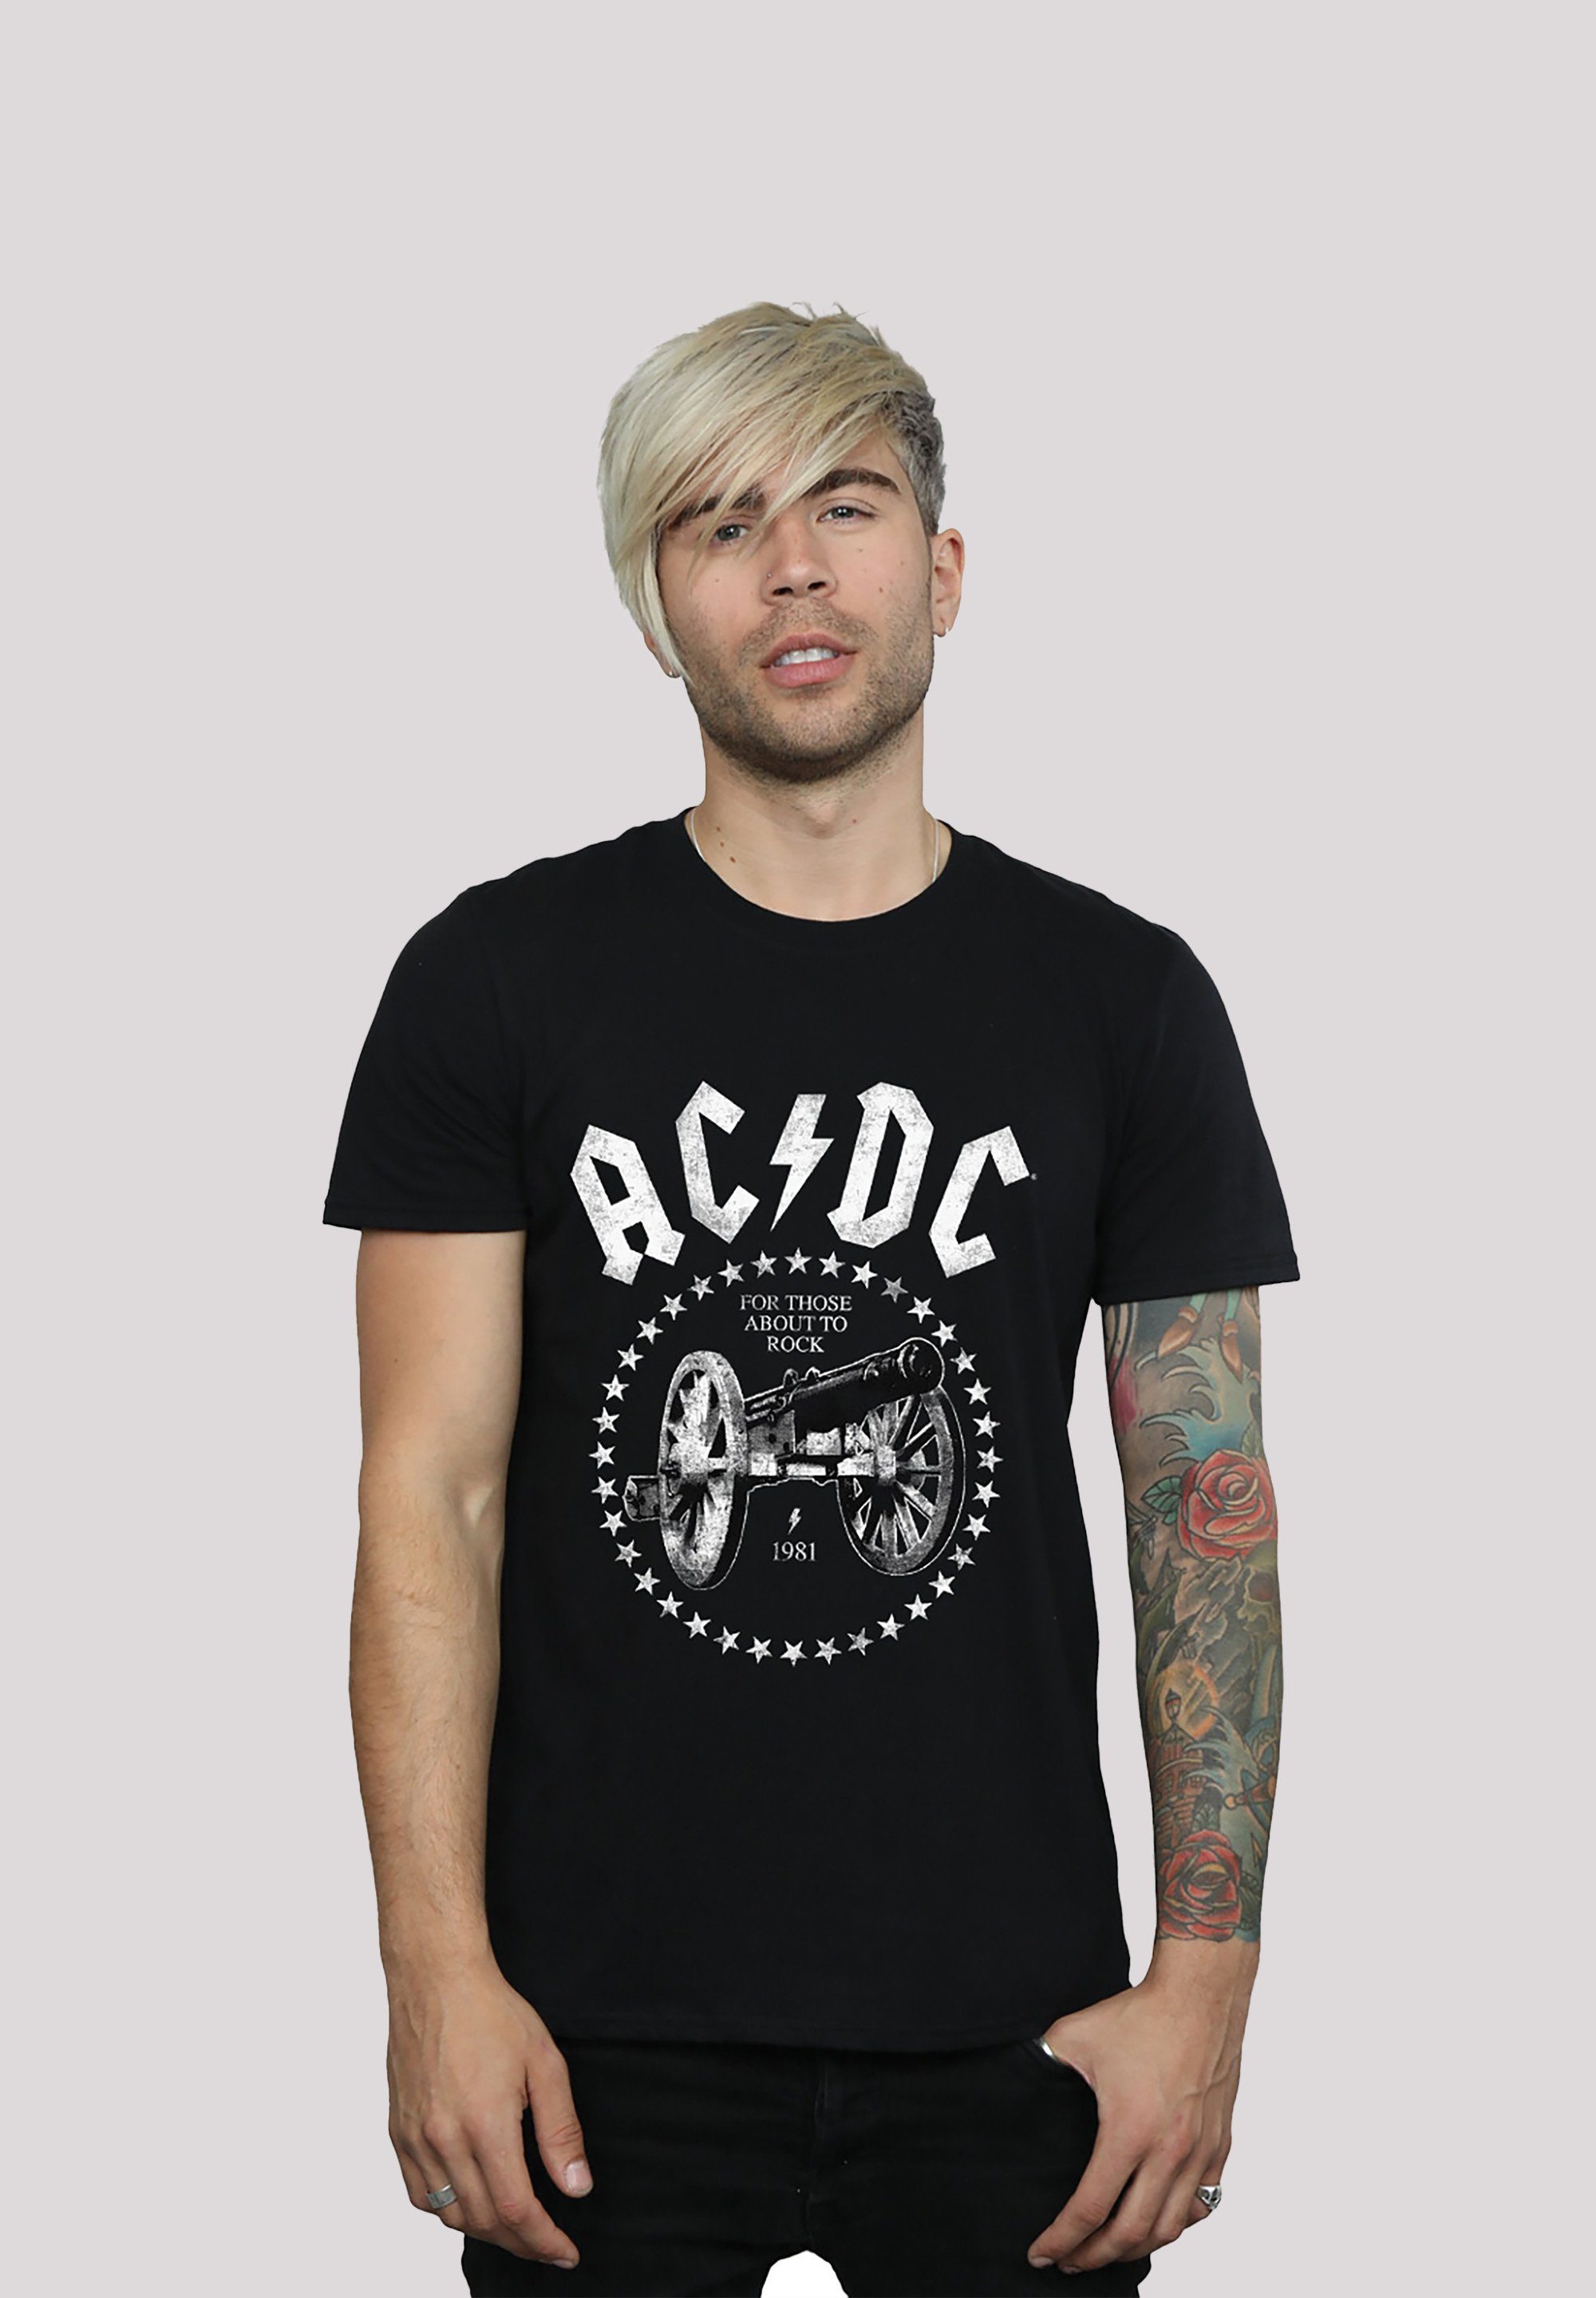 für You ACDC We & Kinder Cannon Salute F4NT4STIC Print Herren T-Shirt